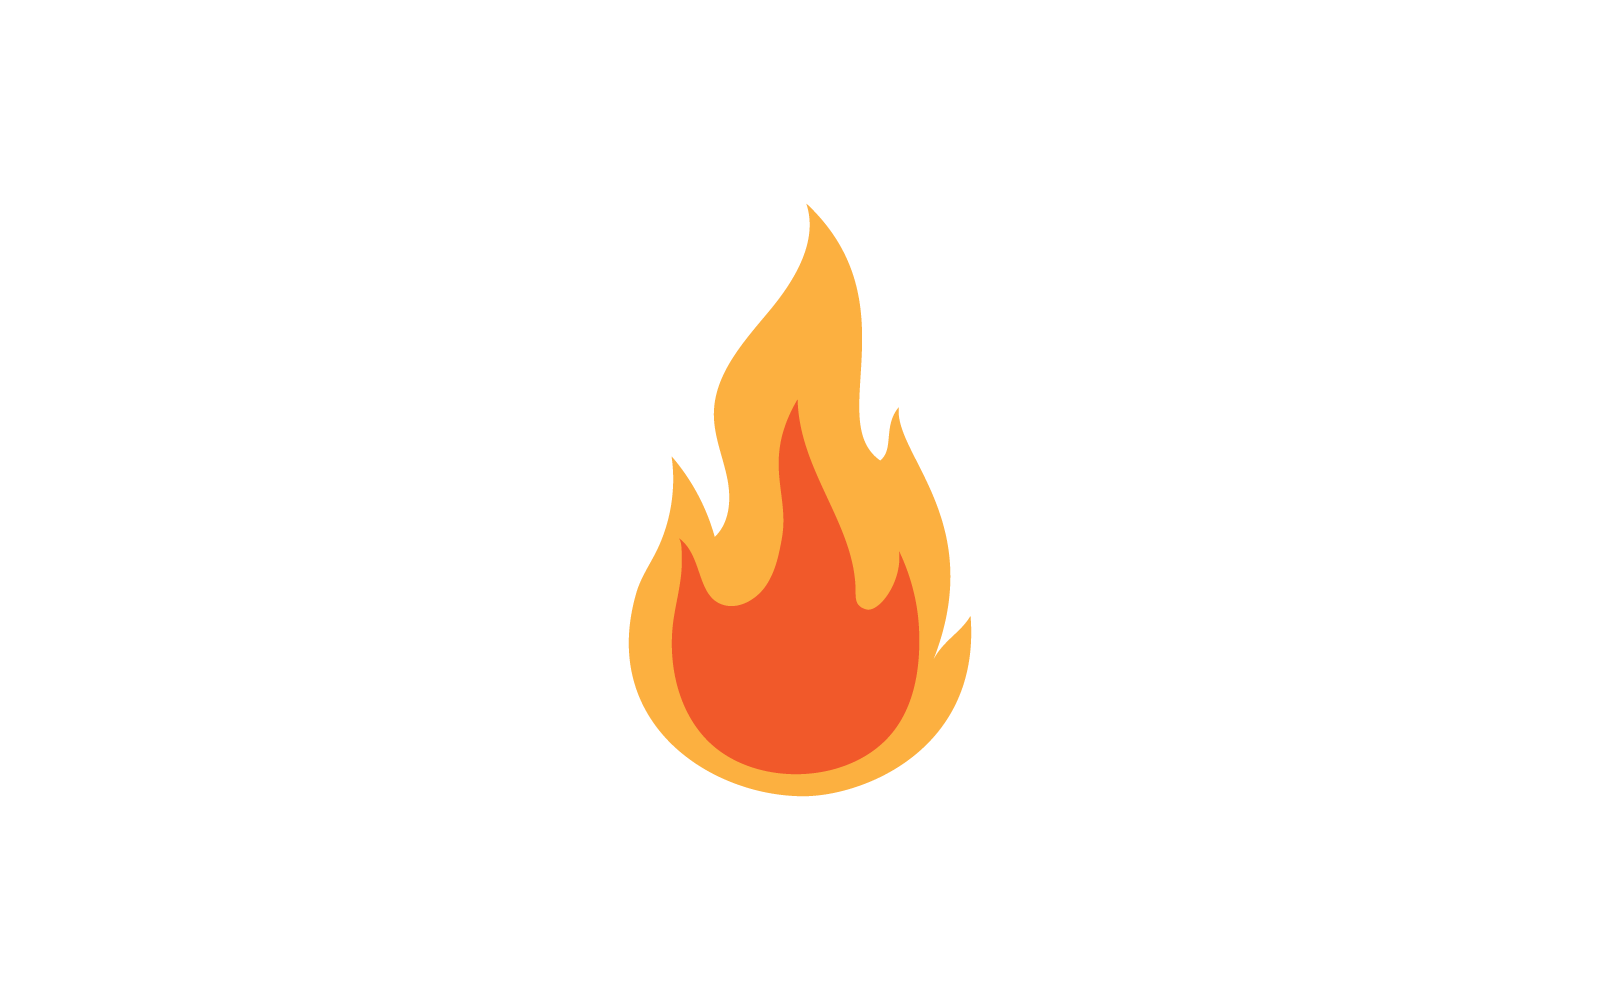 Fire flame Logo vector, Oil, gas and energy concept